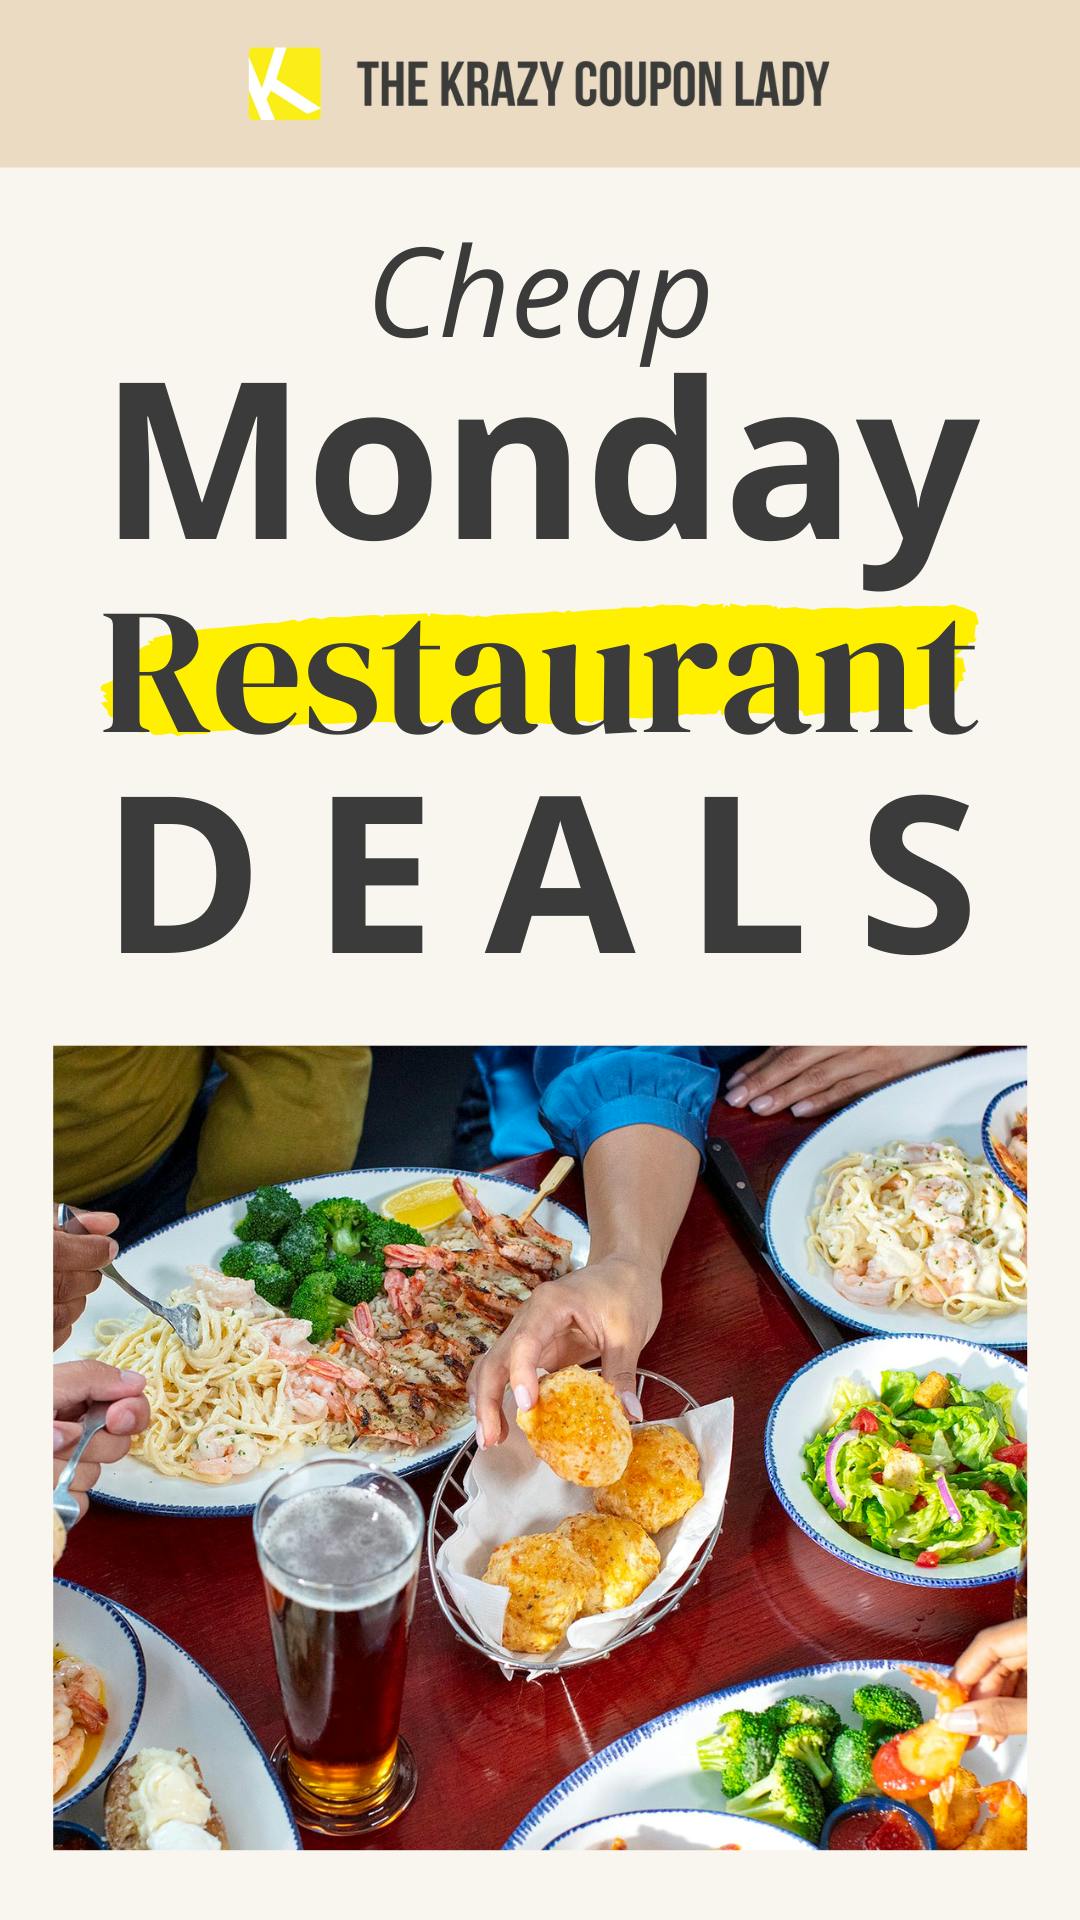 Take the Night Off With These Cheap Monday Restaurant Deals